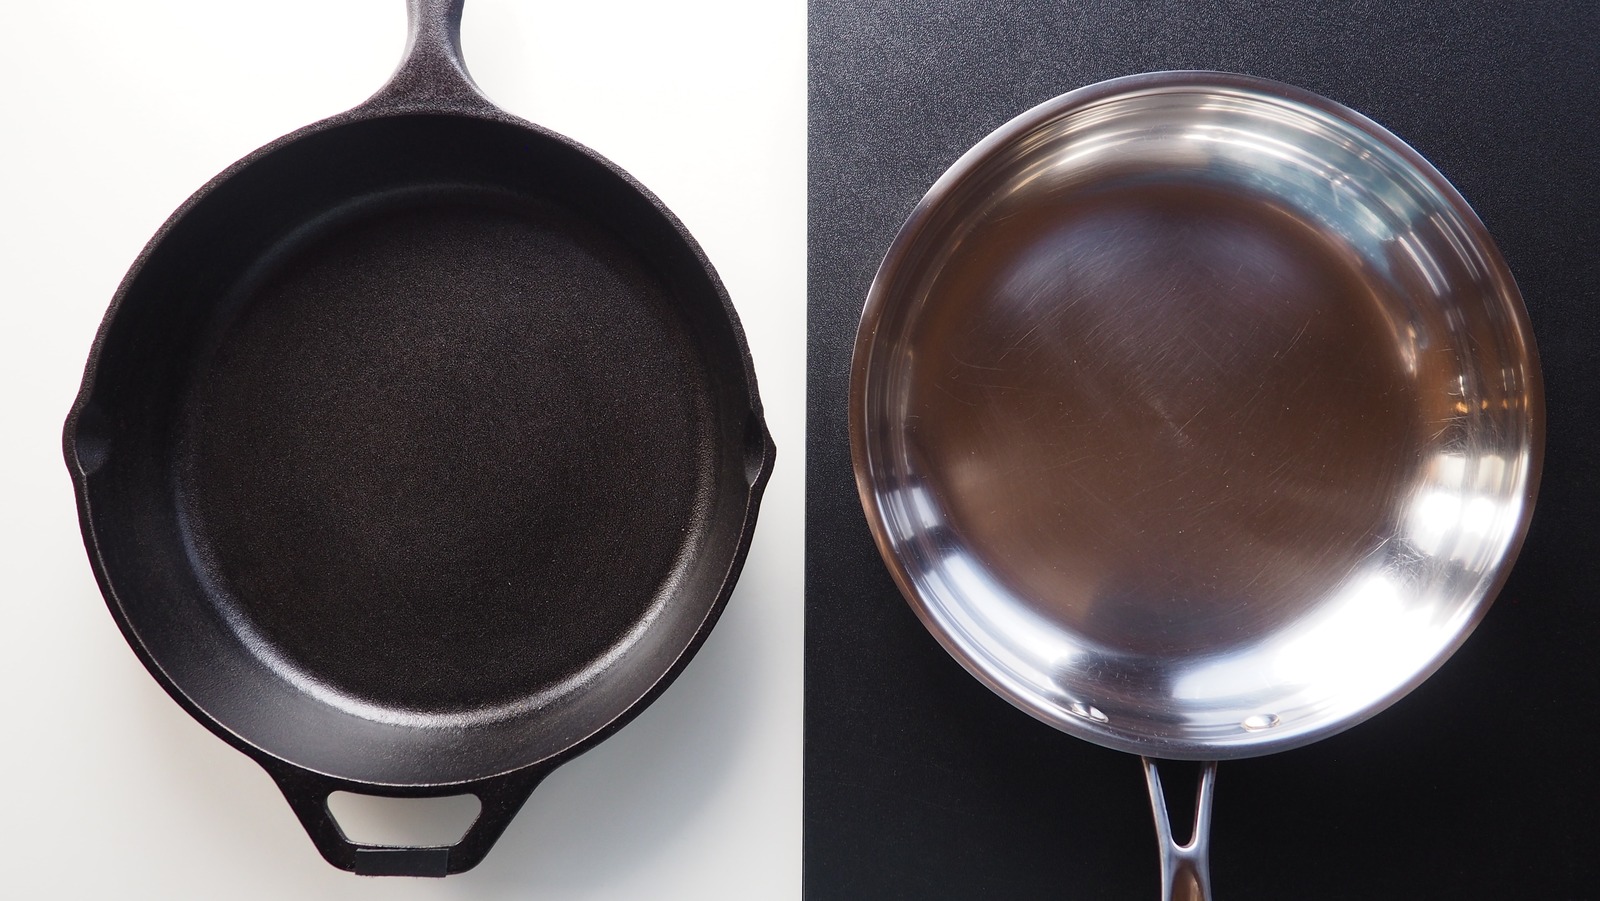 https://www.mashed.com/img/gallery/cast-iron-vs-stainless-steel-which-is-better/l-intro-1696017442.jpg